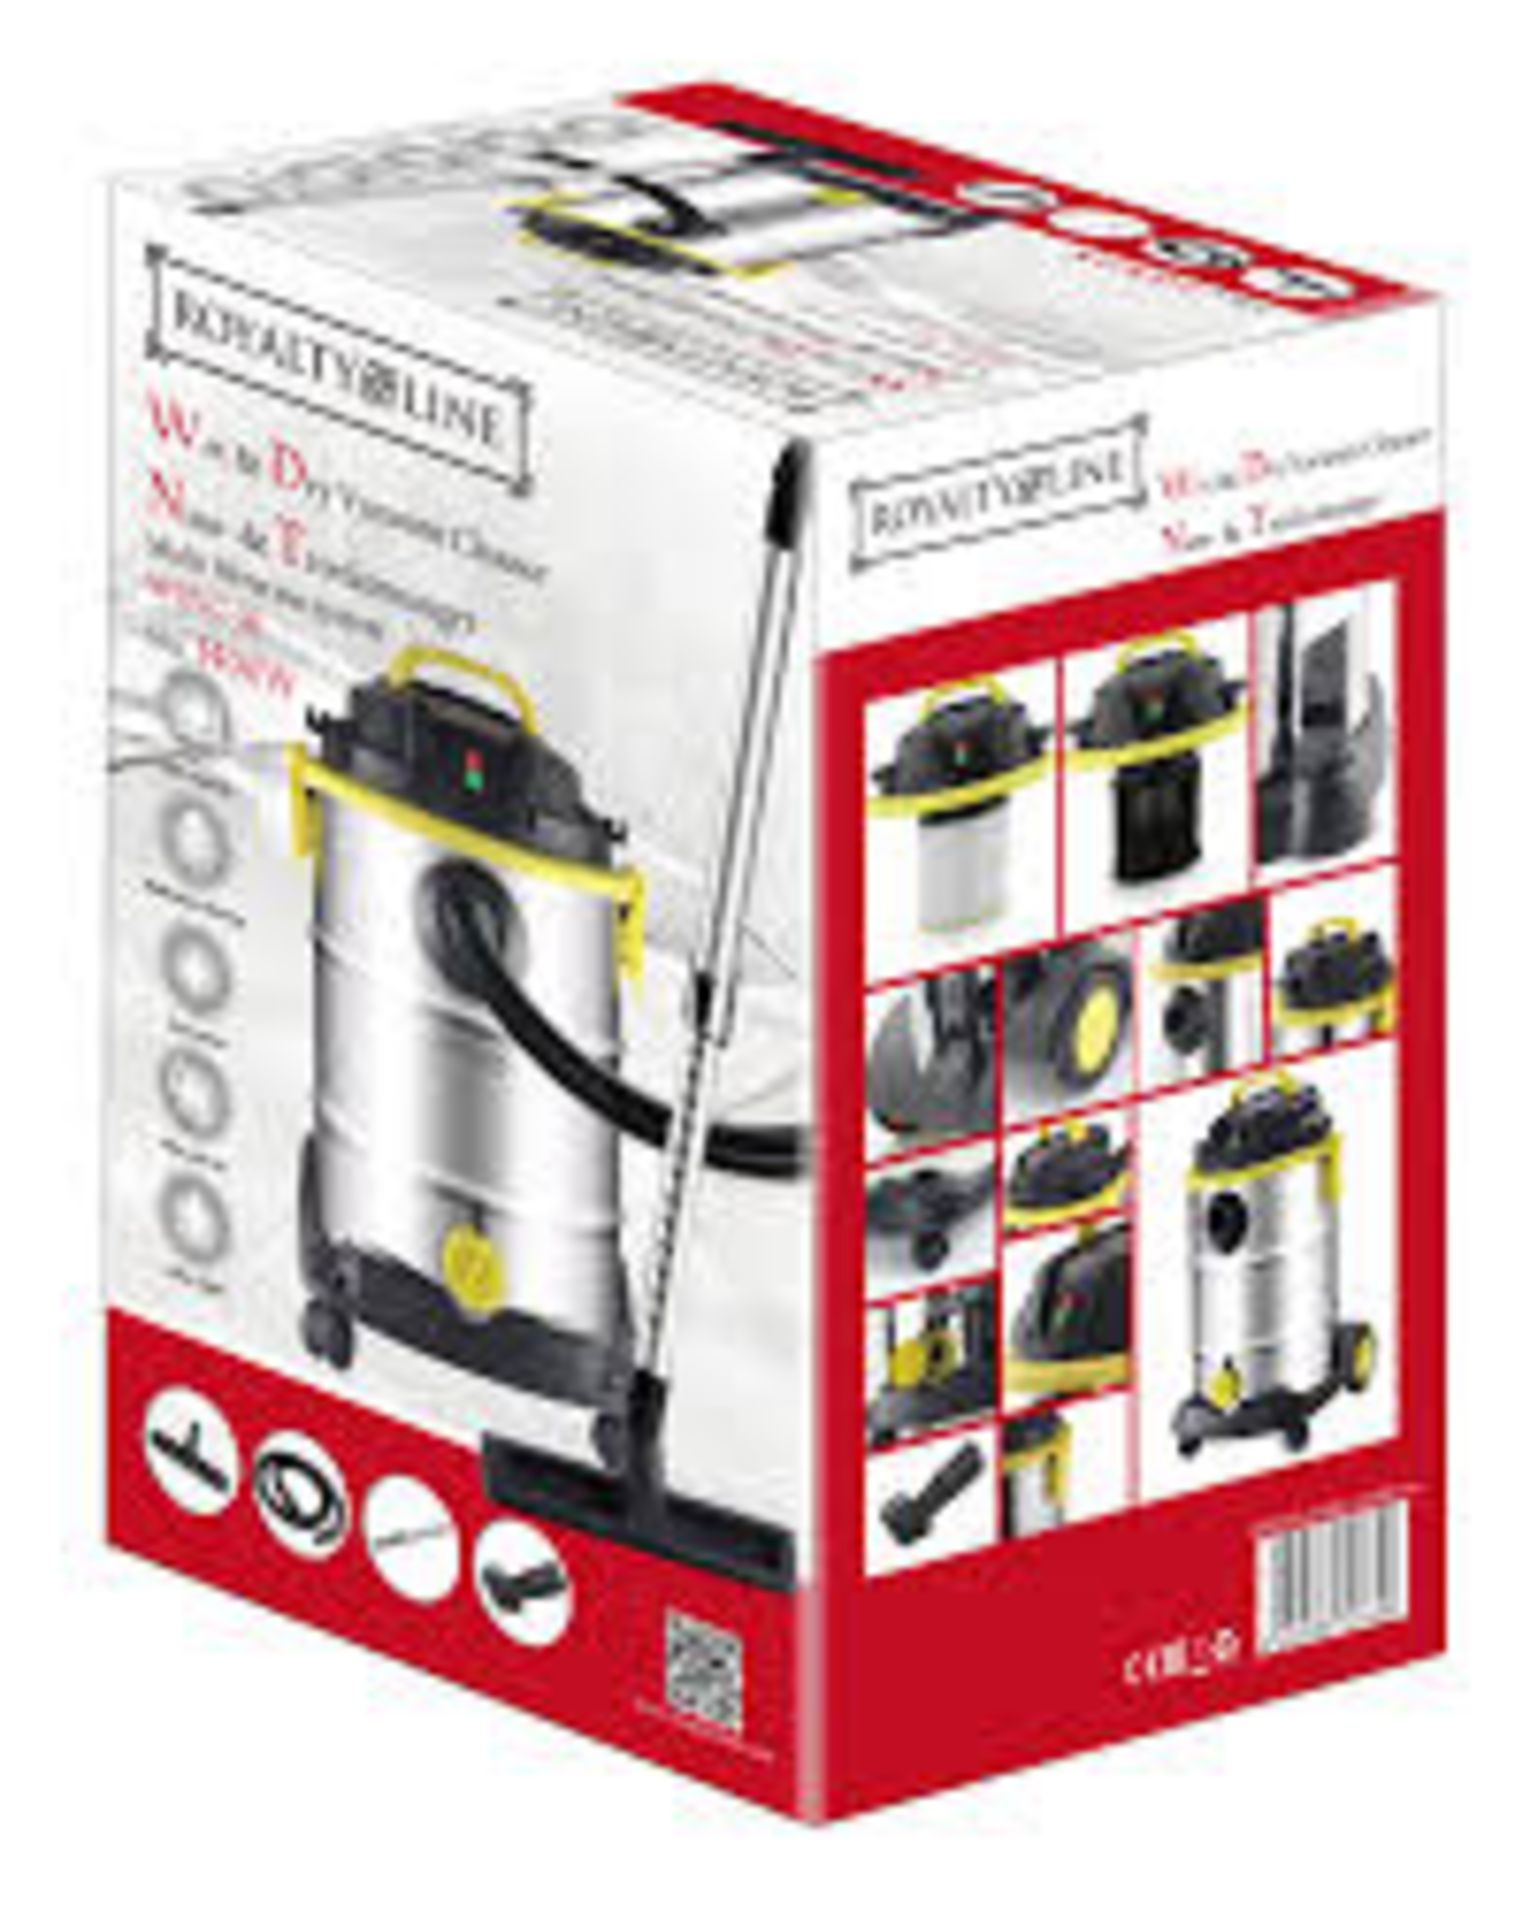 V Brand New Wet and Dry Vacuum Cleaner - 1400W - 30L Capacity - Multi-Layer Filtering - Easy Clean - Image 2 of 2